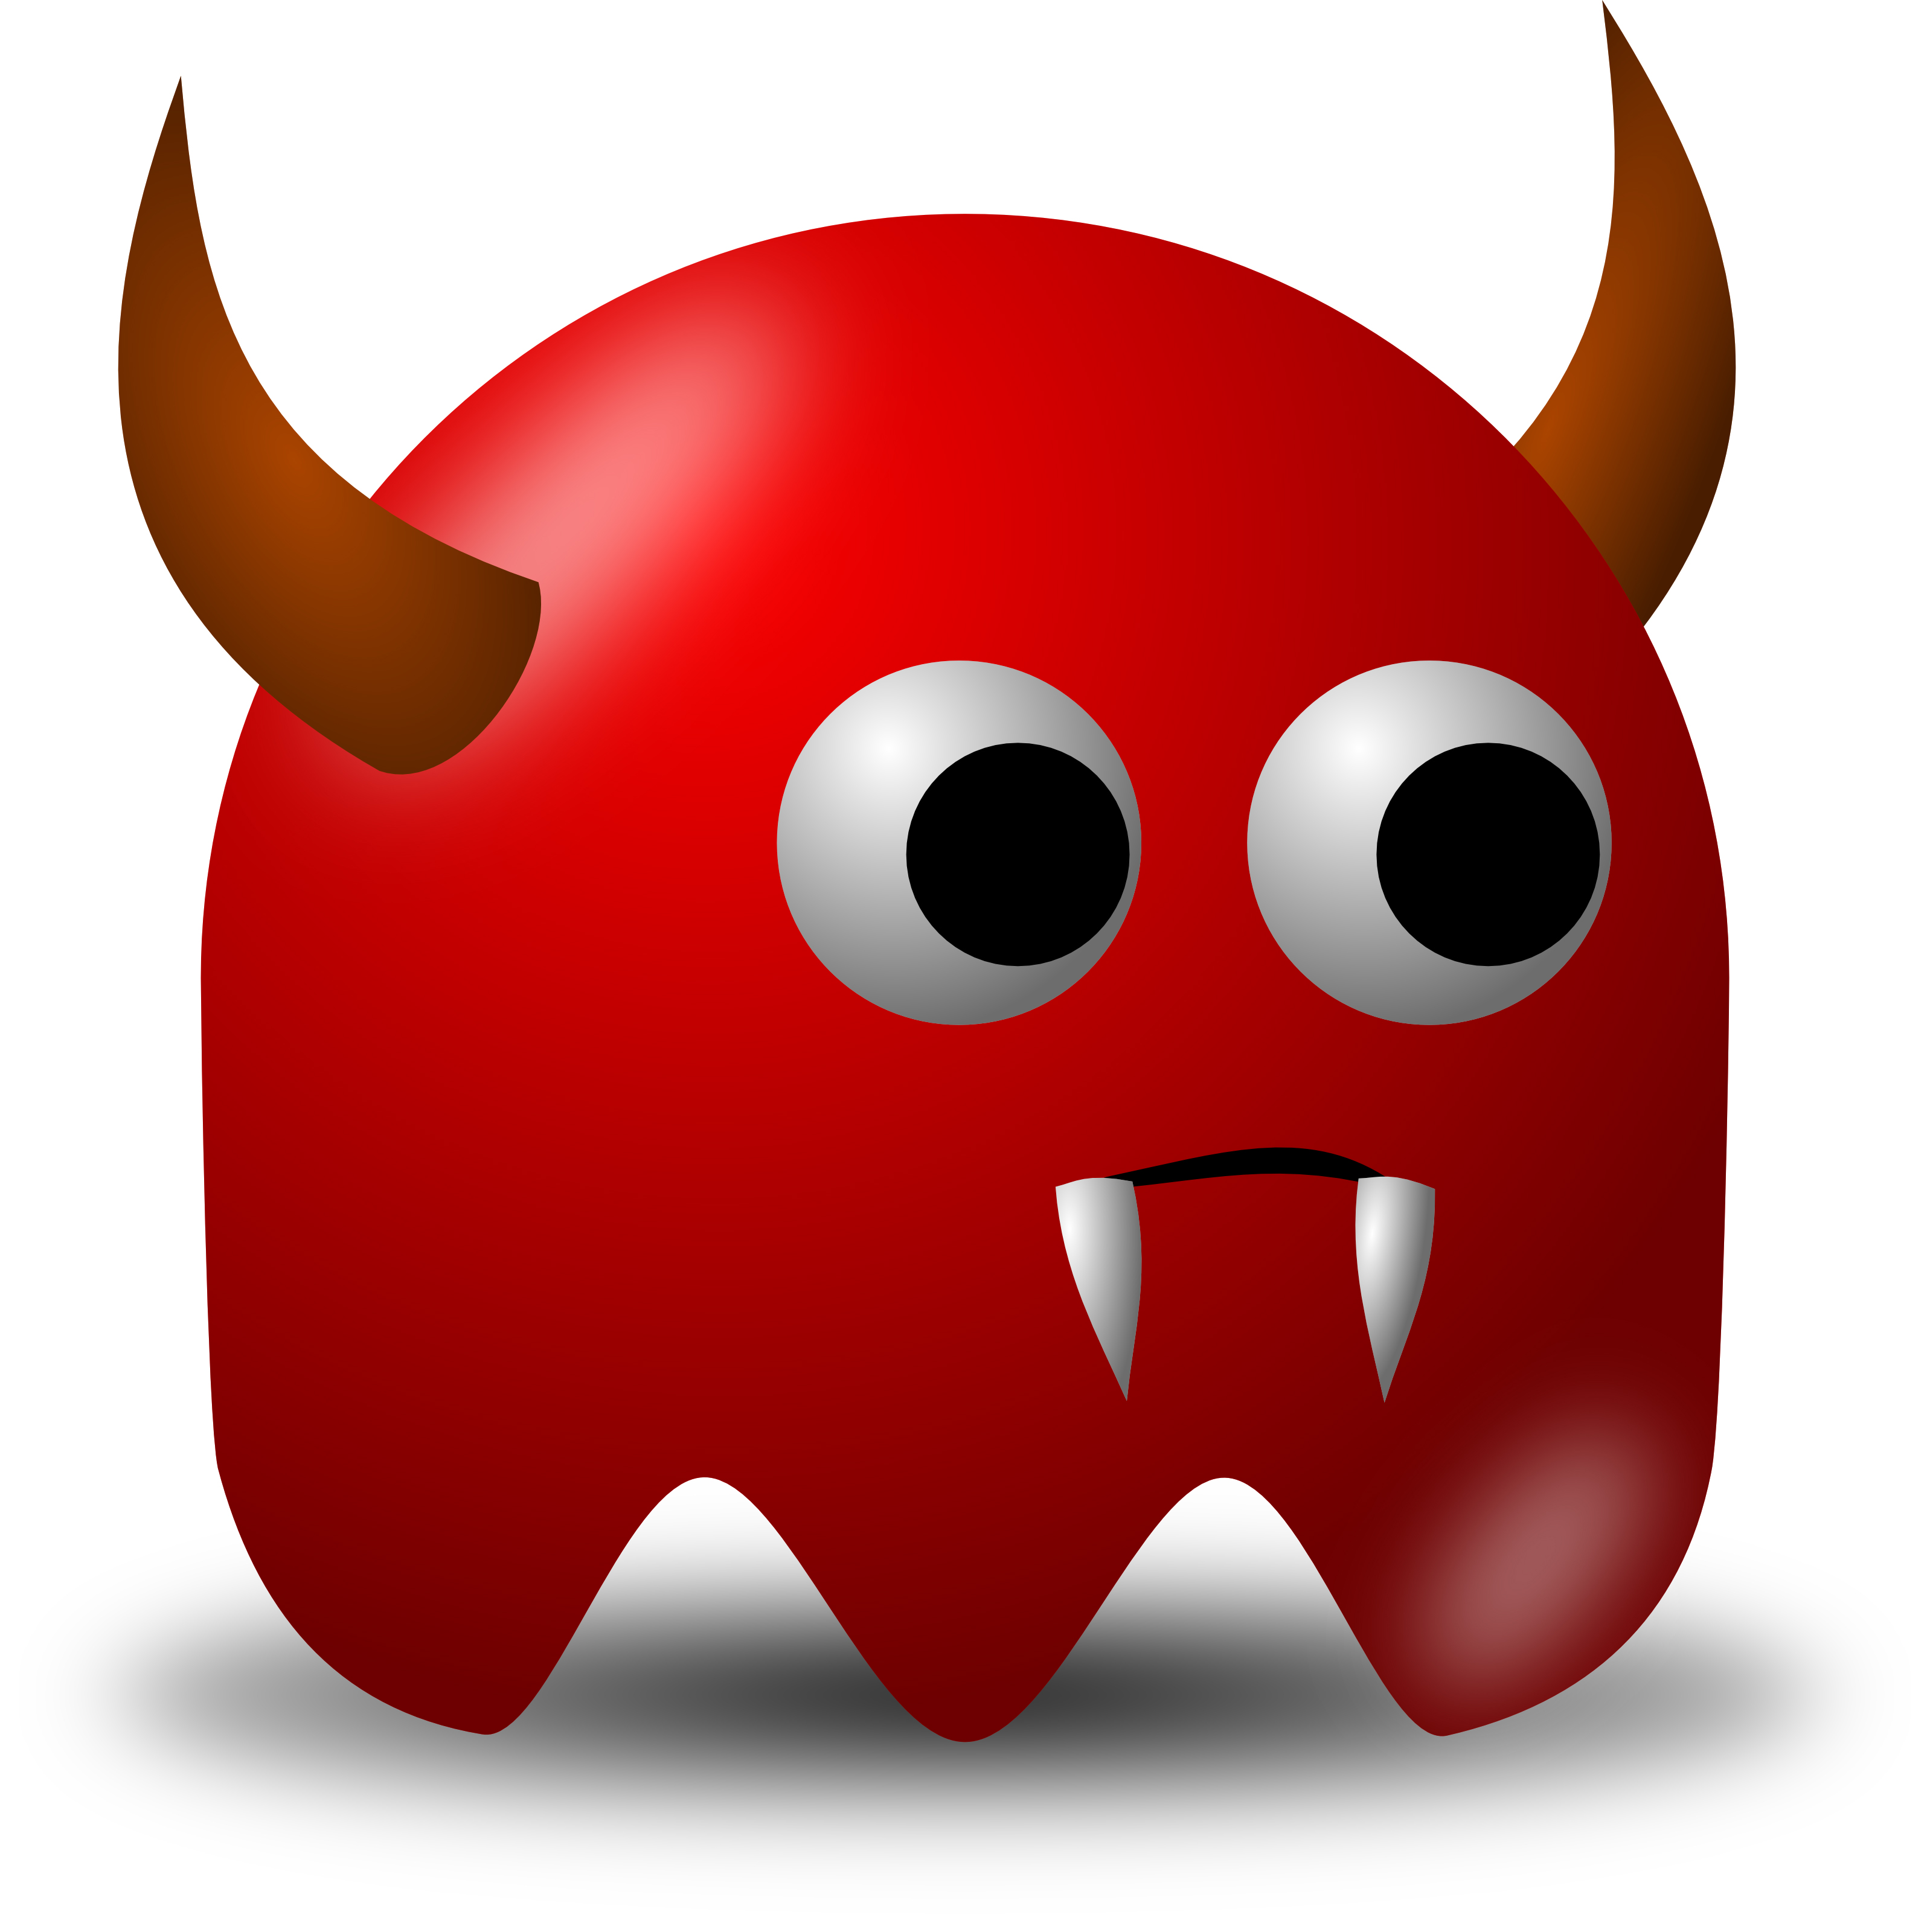 Devil Avatar Character With Horns And Fangs - Free Vector Clipart ...